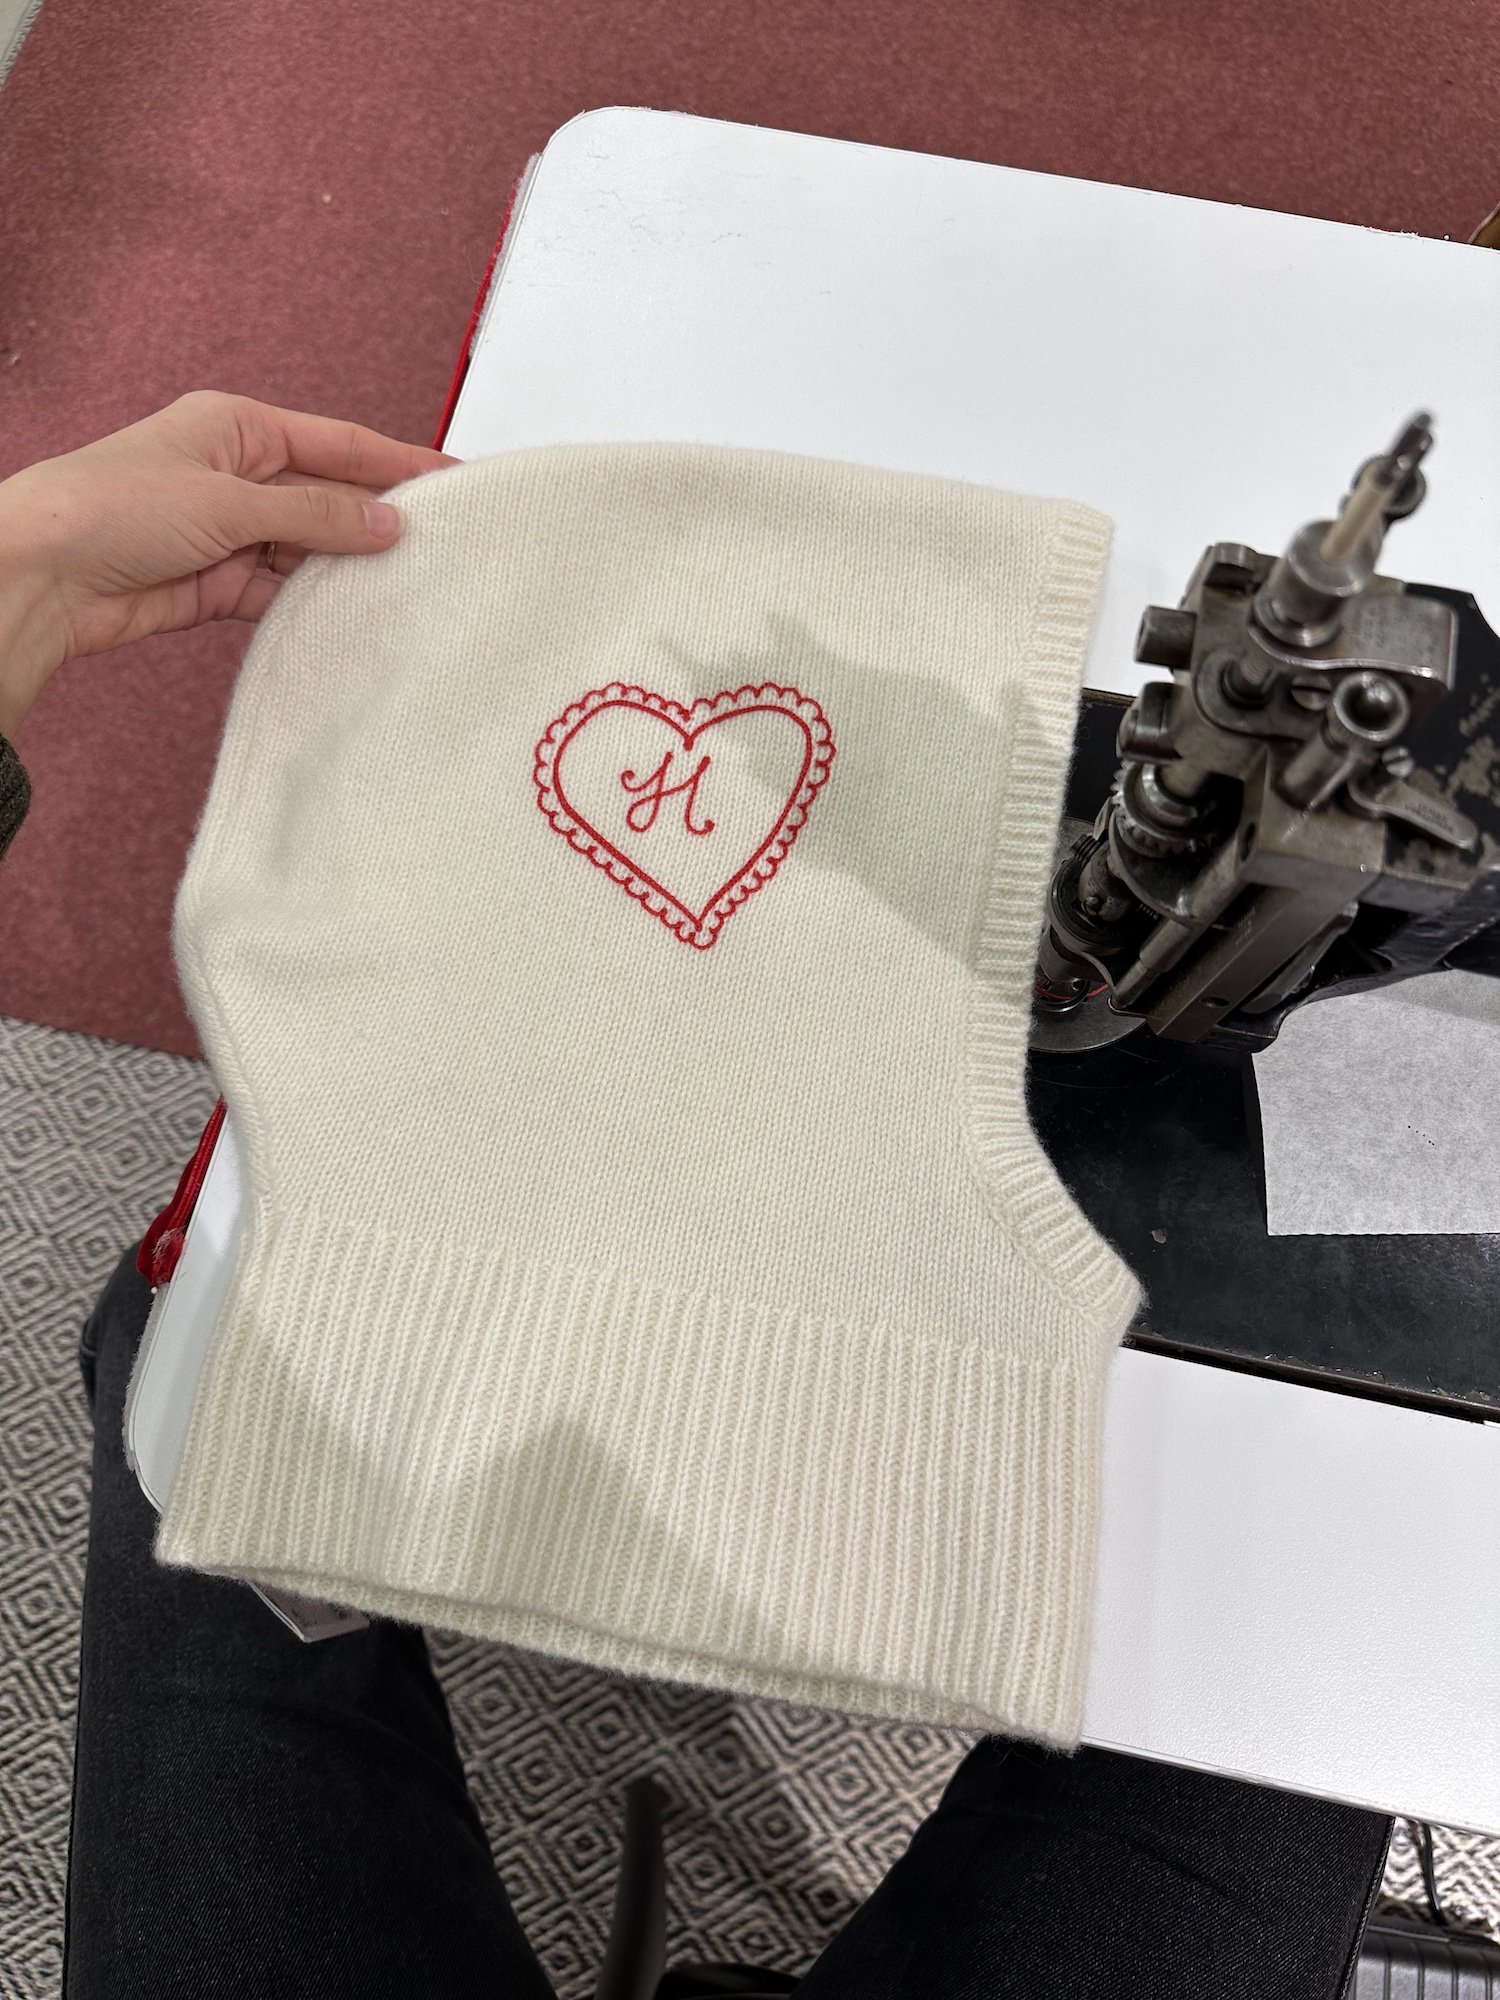 & other stories embroidery heart balaclava.jpg